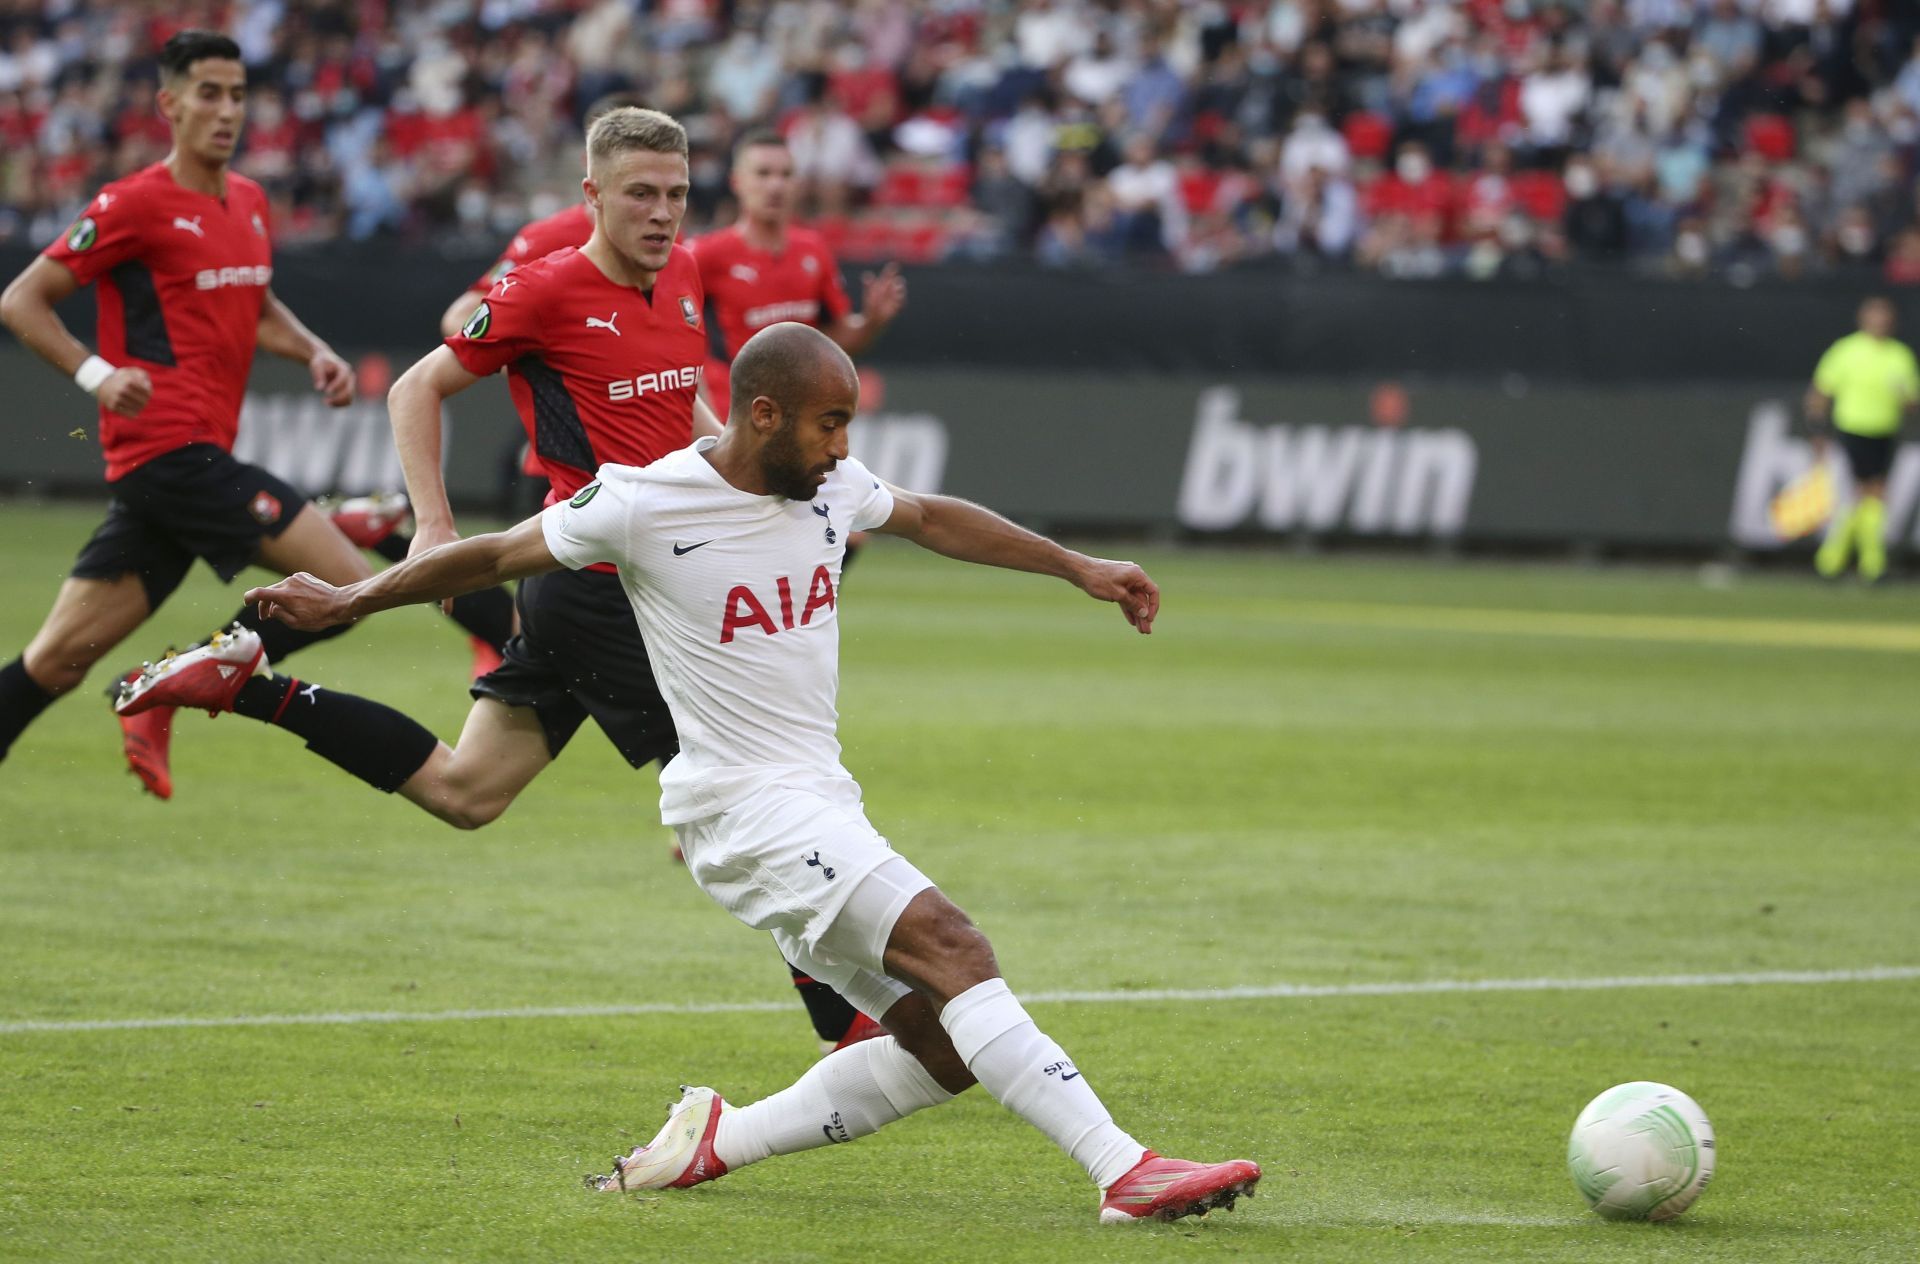 Tottenham Hotspur face Rennes in their UEFA Europa Conference League fixture on Thursday